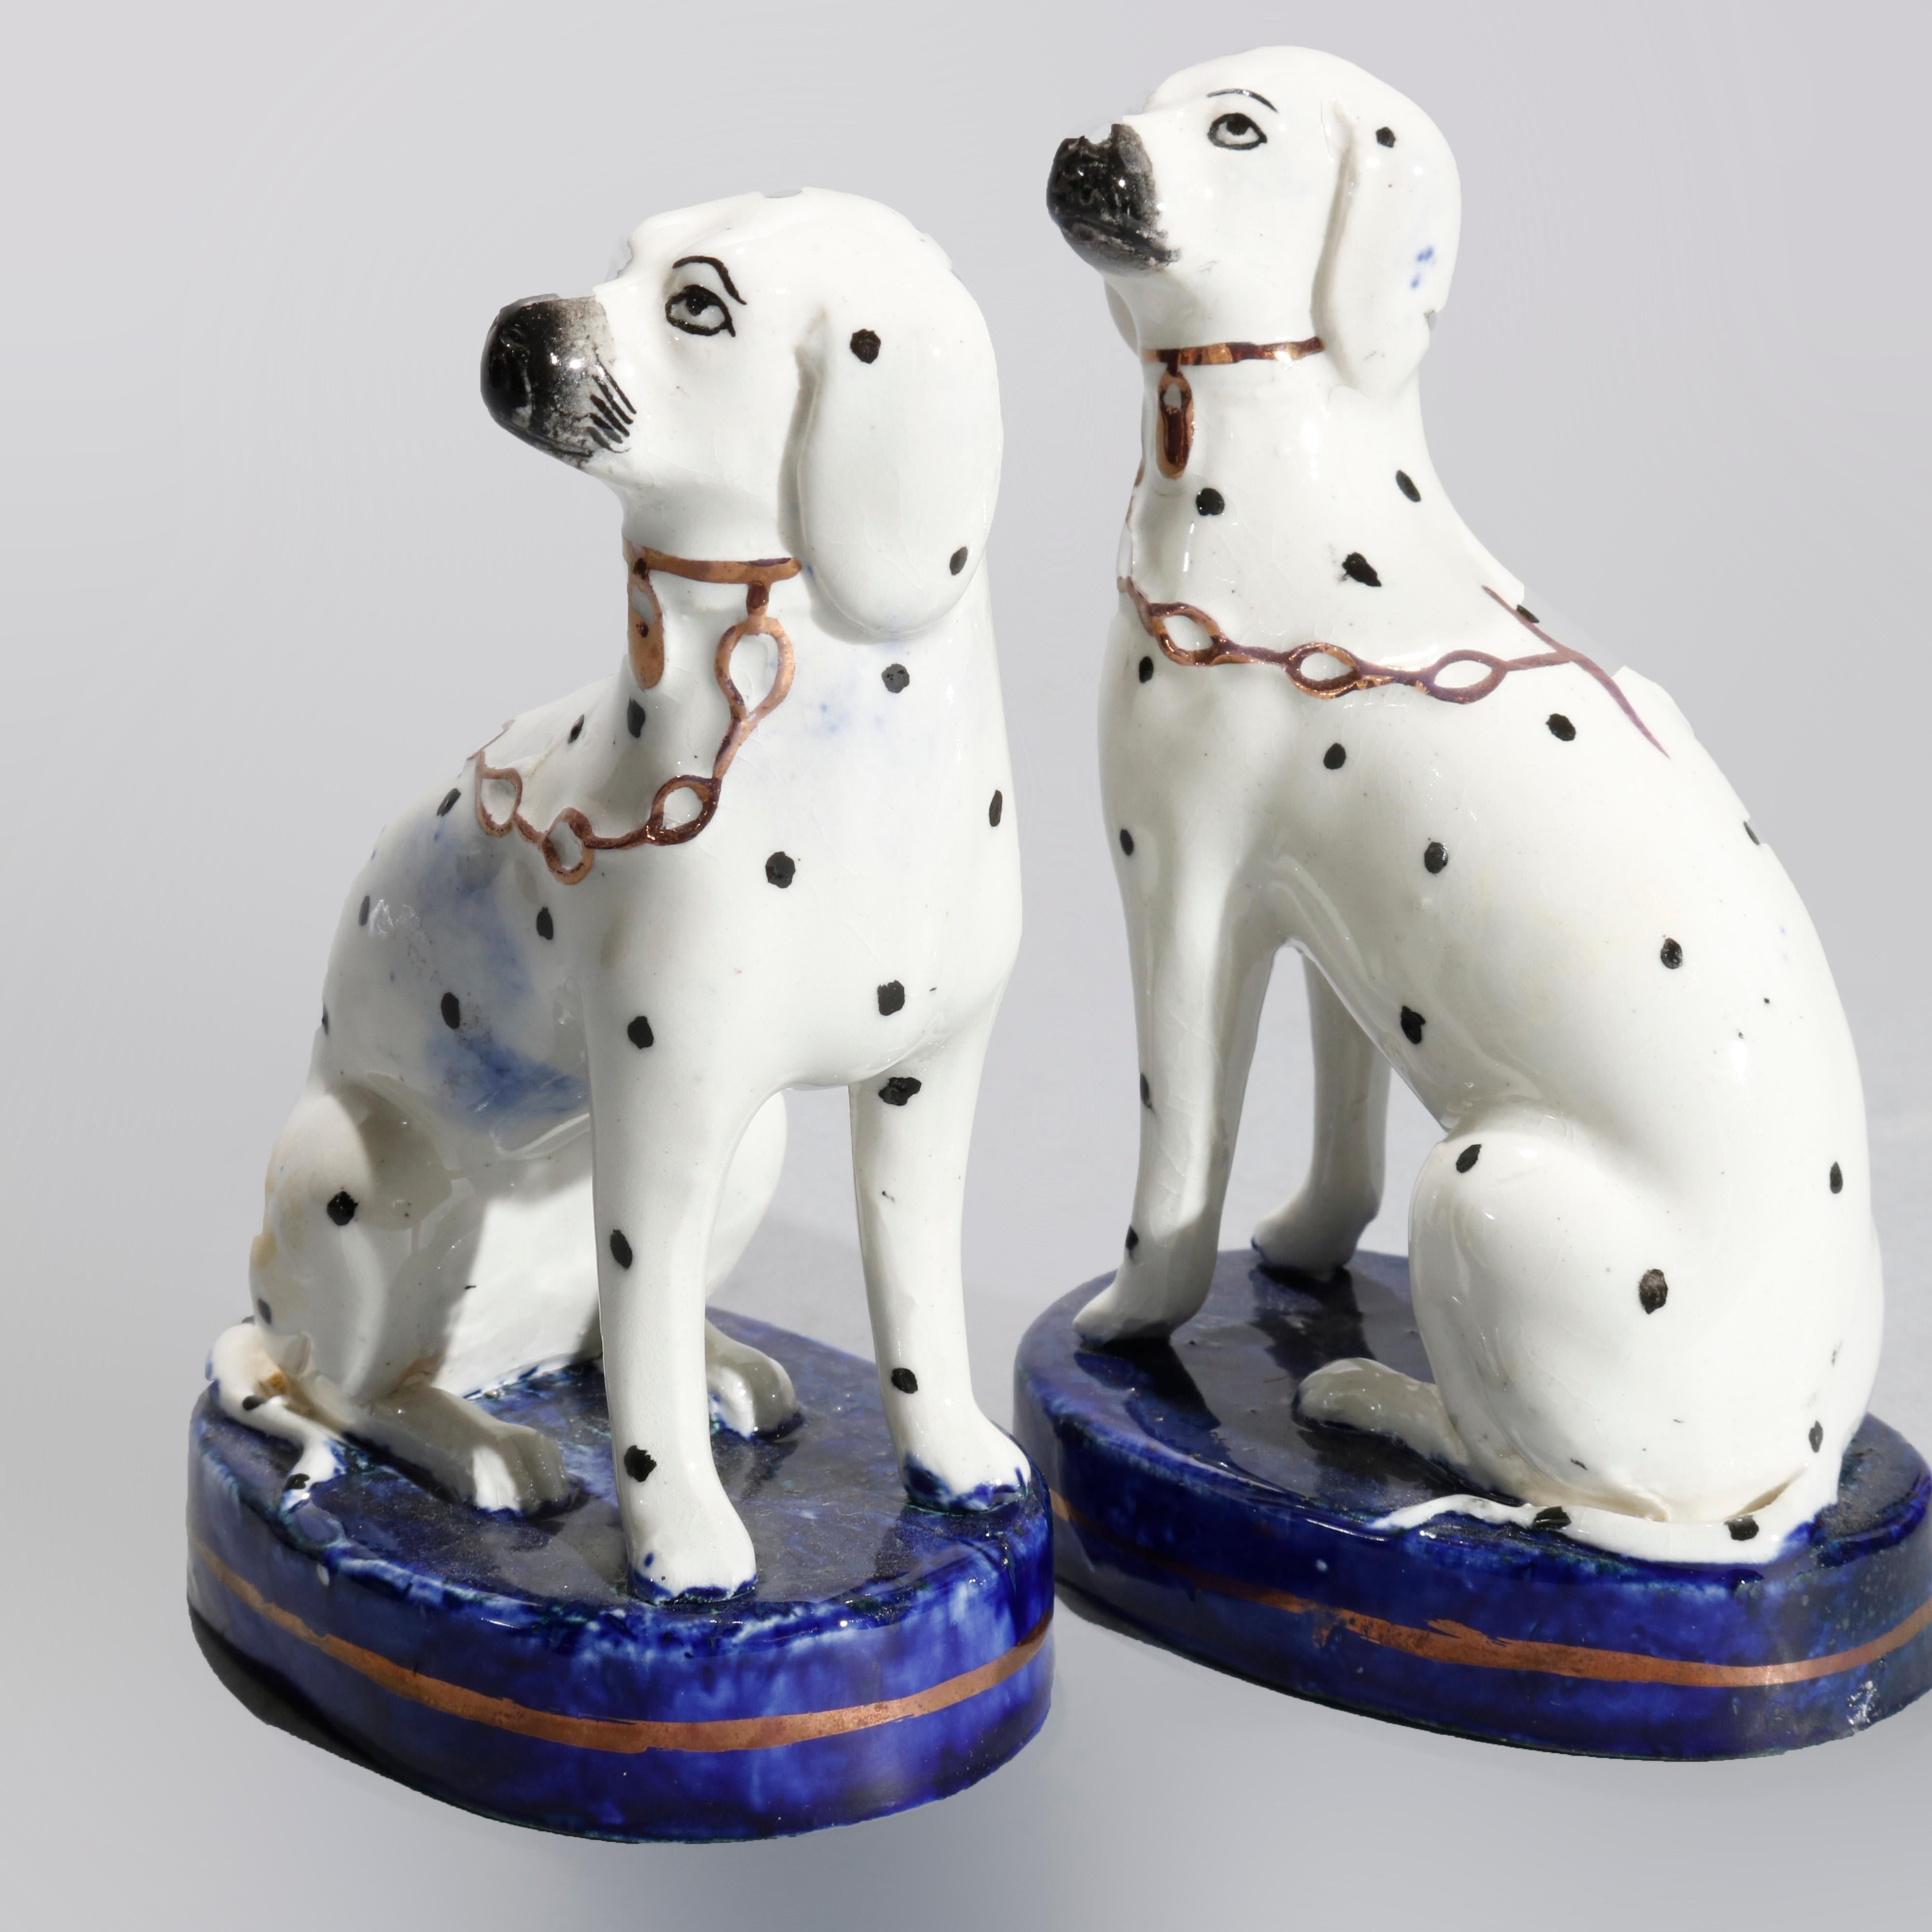 An antique figural pair of English Staffordshire porcelain Dalmation dogs seated on marble painted bases as photographed, 20th century.

Measures- 4.25